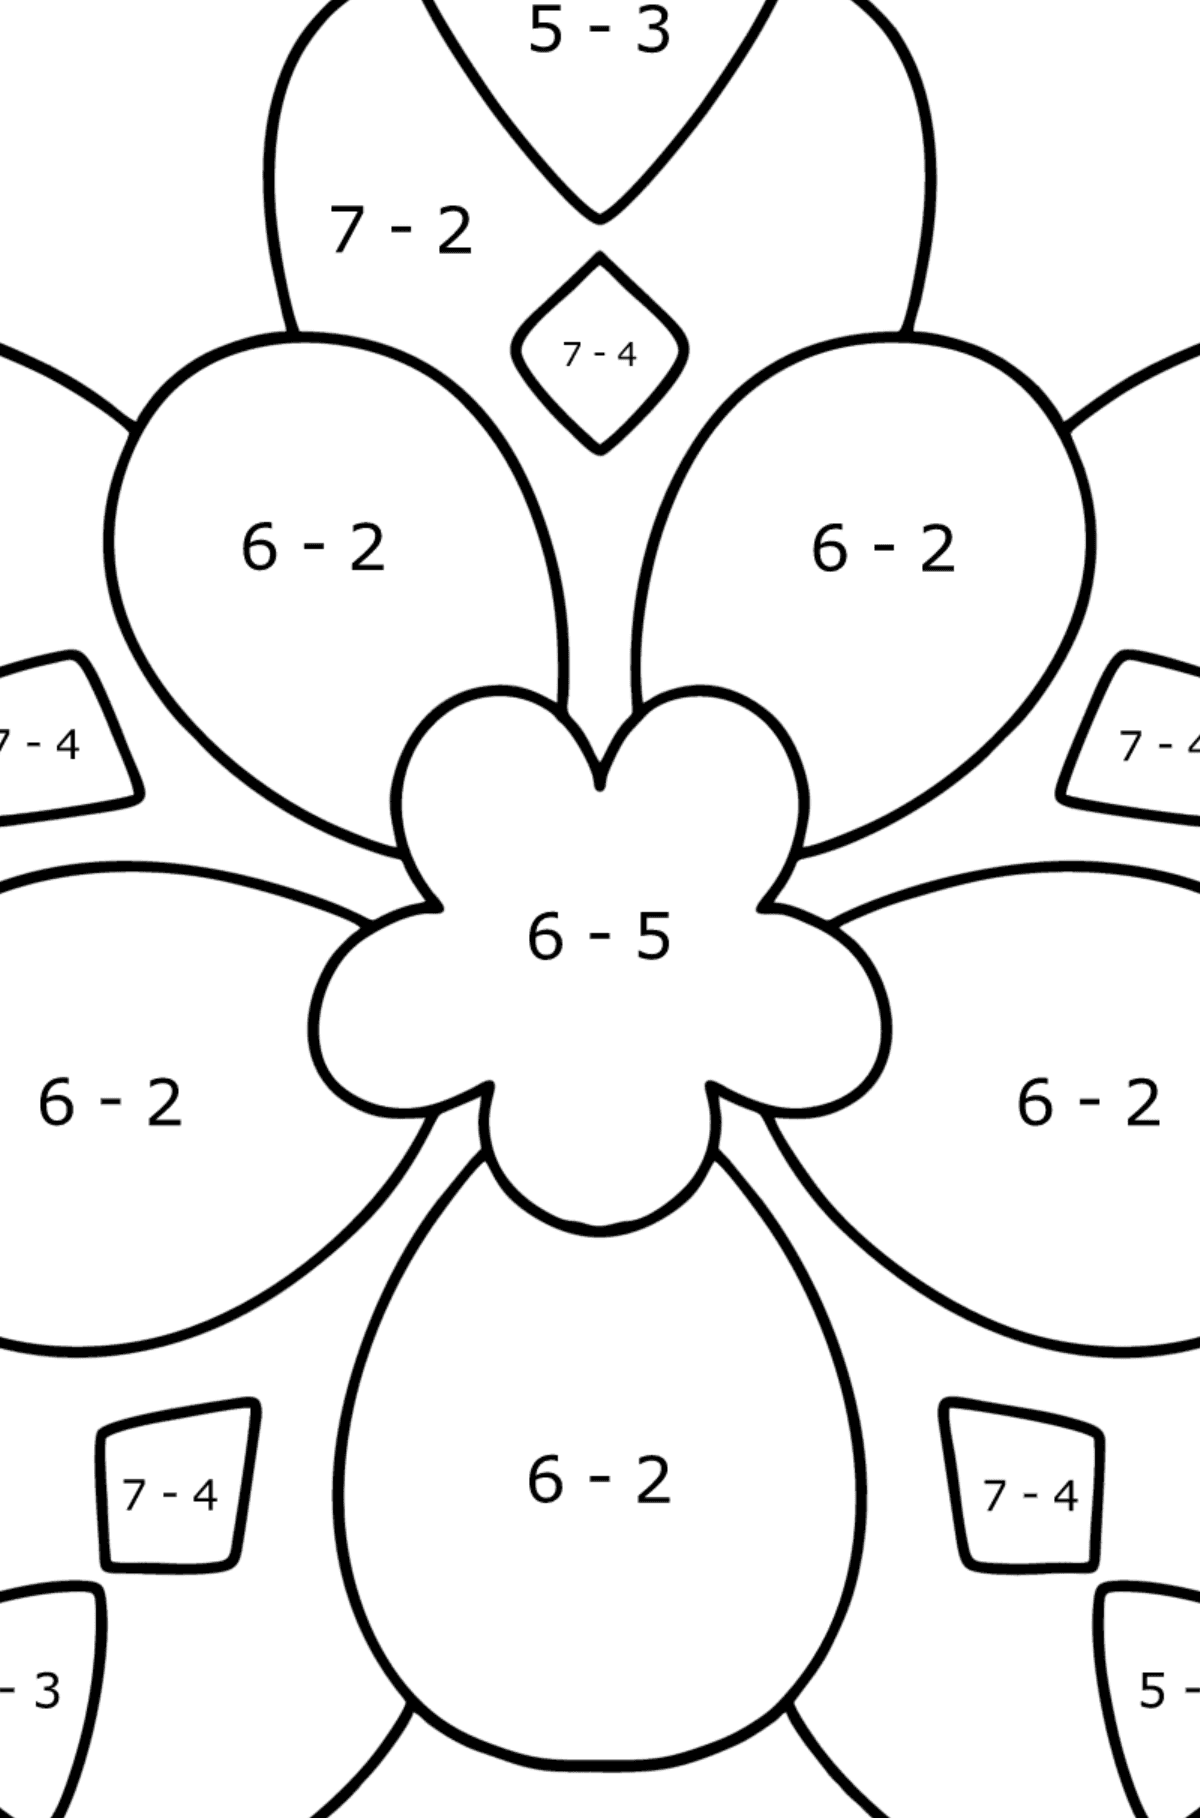 Anti stress Heart coloring page - Math Coloring - Subtraction for Kids